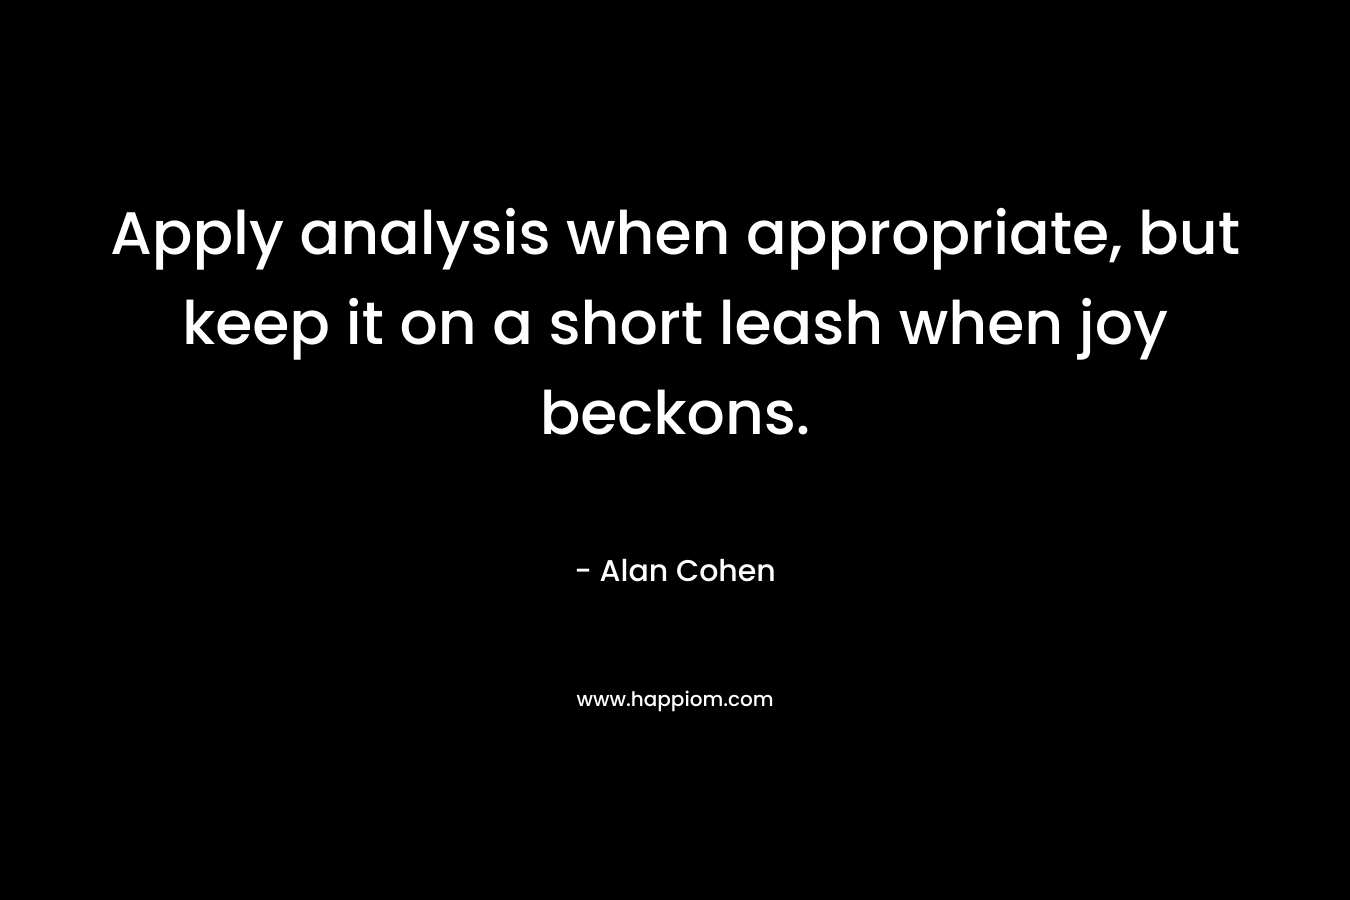 Apply analysis when appropriate, but keep it on a short leash when joy beckons.